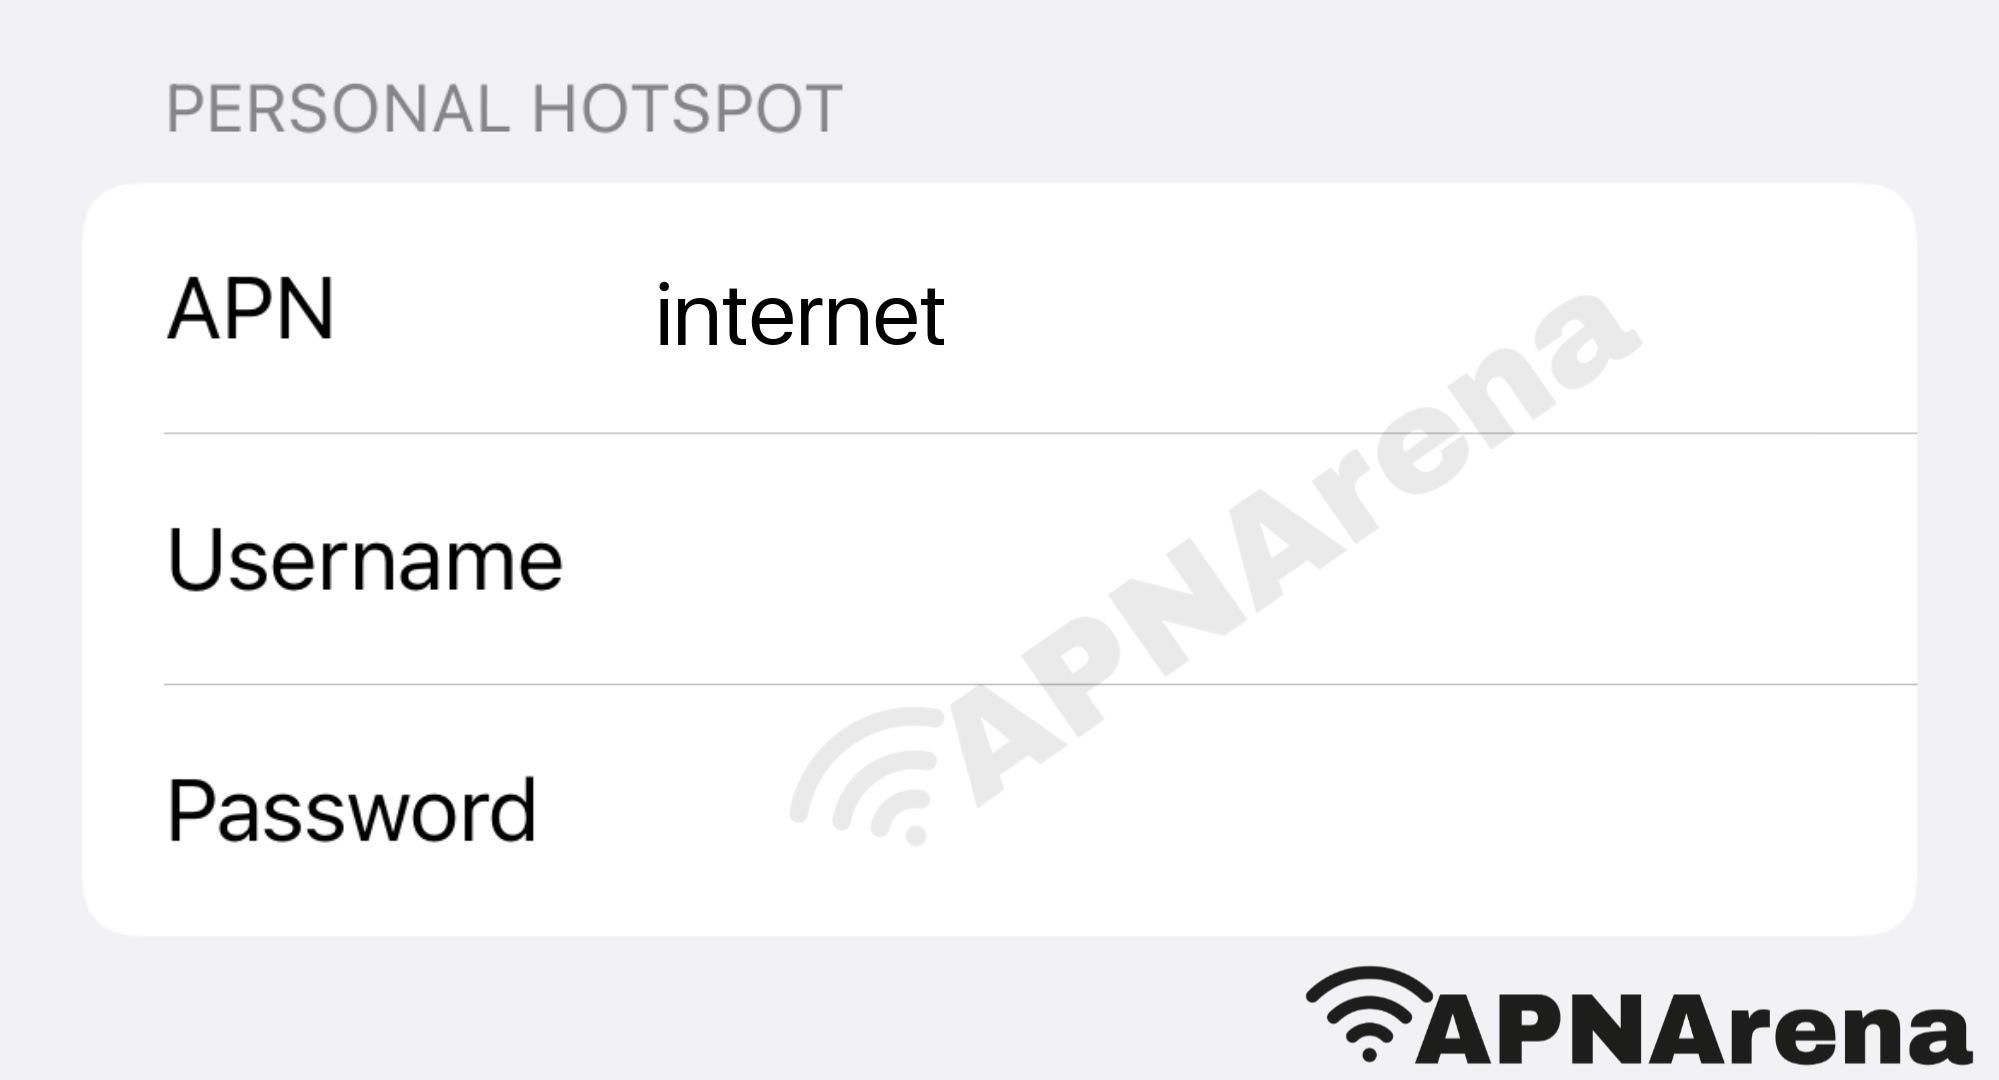 Access Wireless Personal Hotspot Settings for iPhone